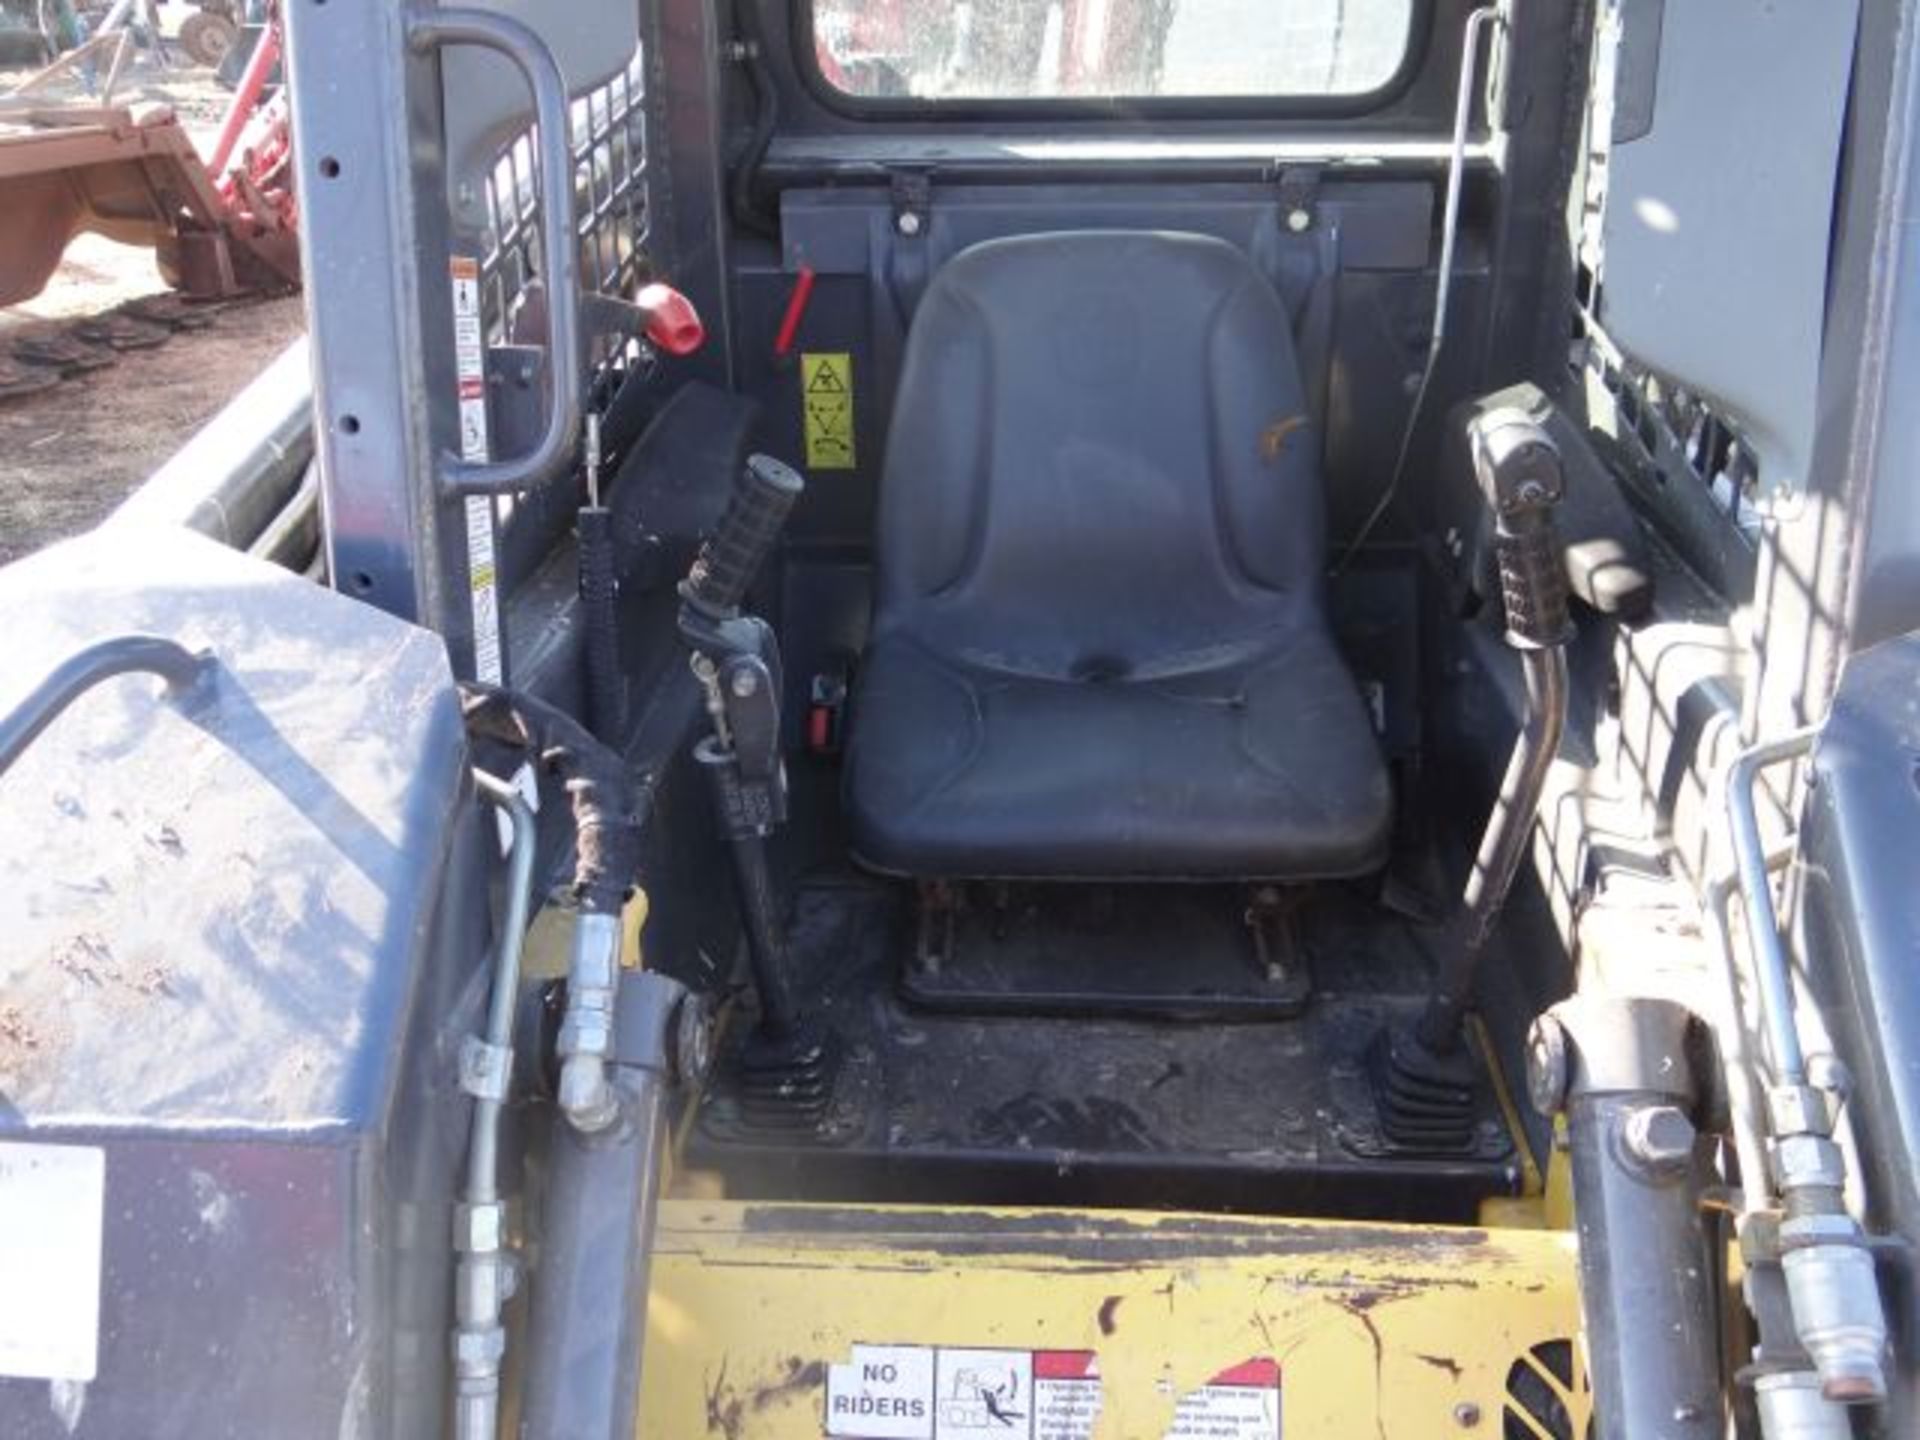 NH L150 Skid Loader, 2008 200 hrs, All New Oil & Filters, Excellent Condition, Aux Hyd, Good Tires - Image 2 of 5